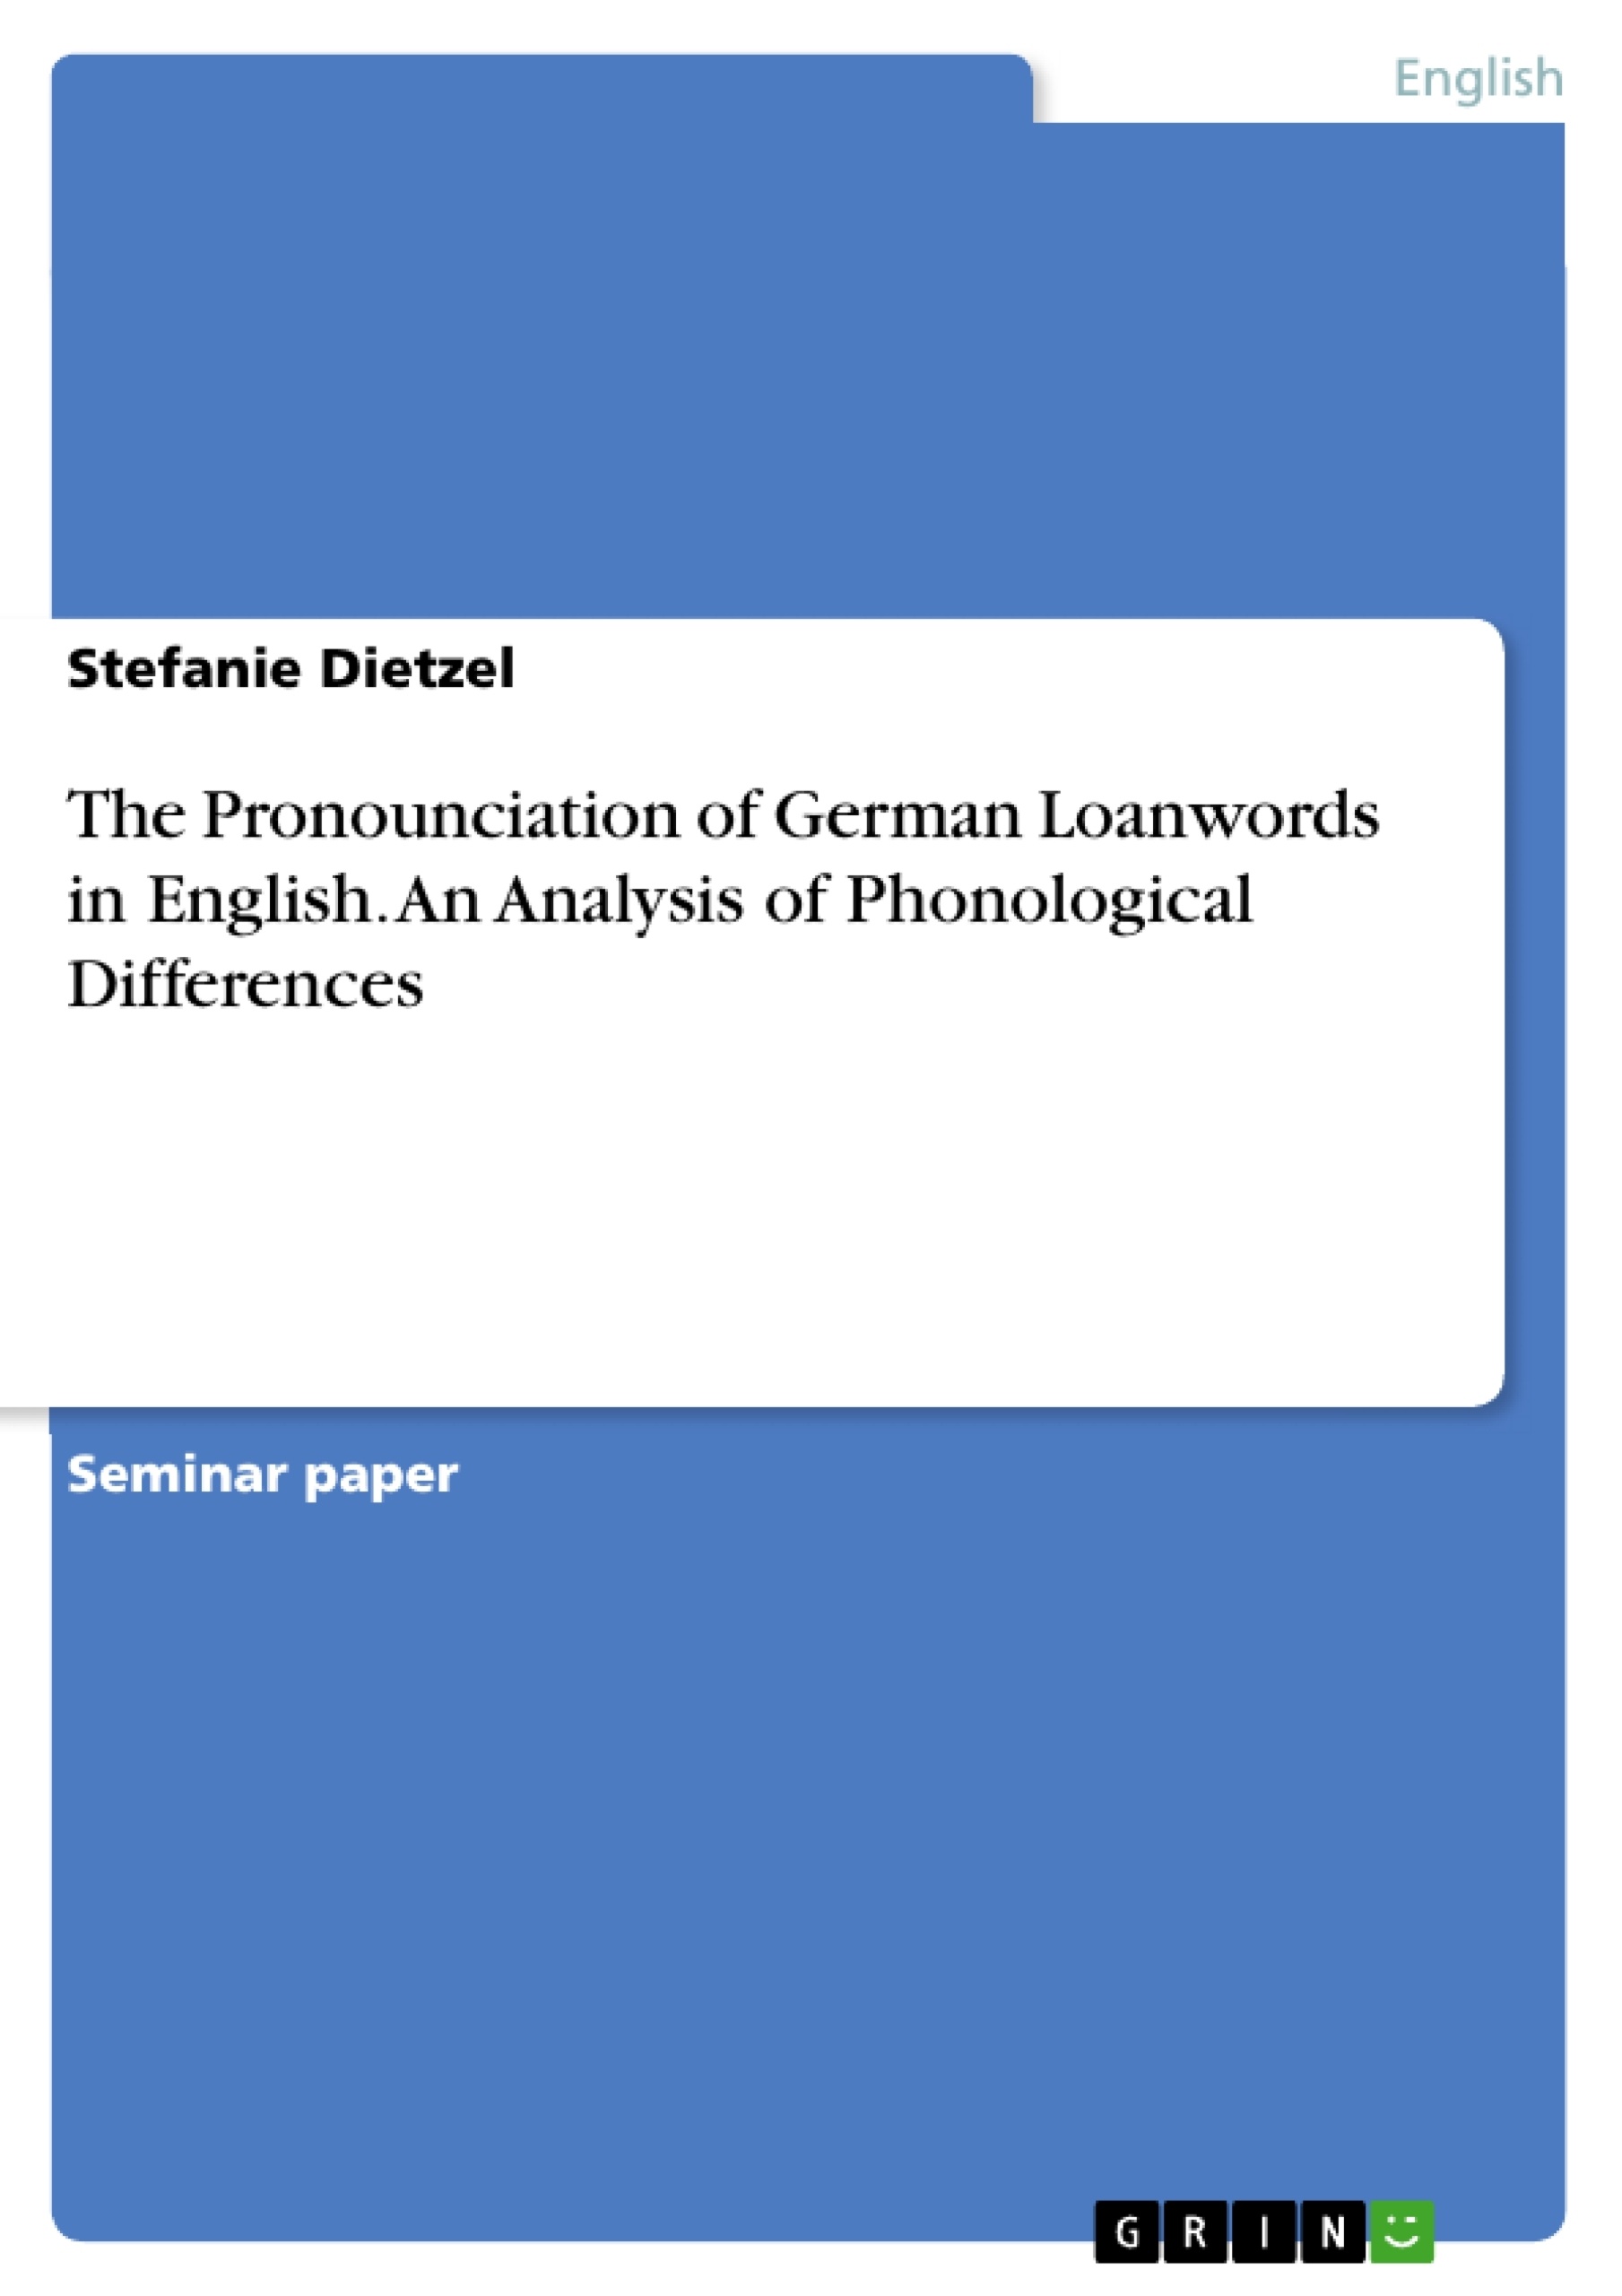 Title: The Pronounciation of German Loanwords in English. An Analysis of Phonological Differences